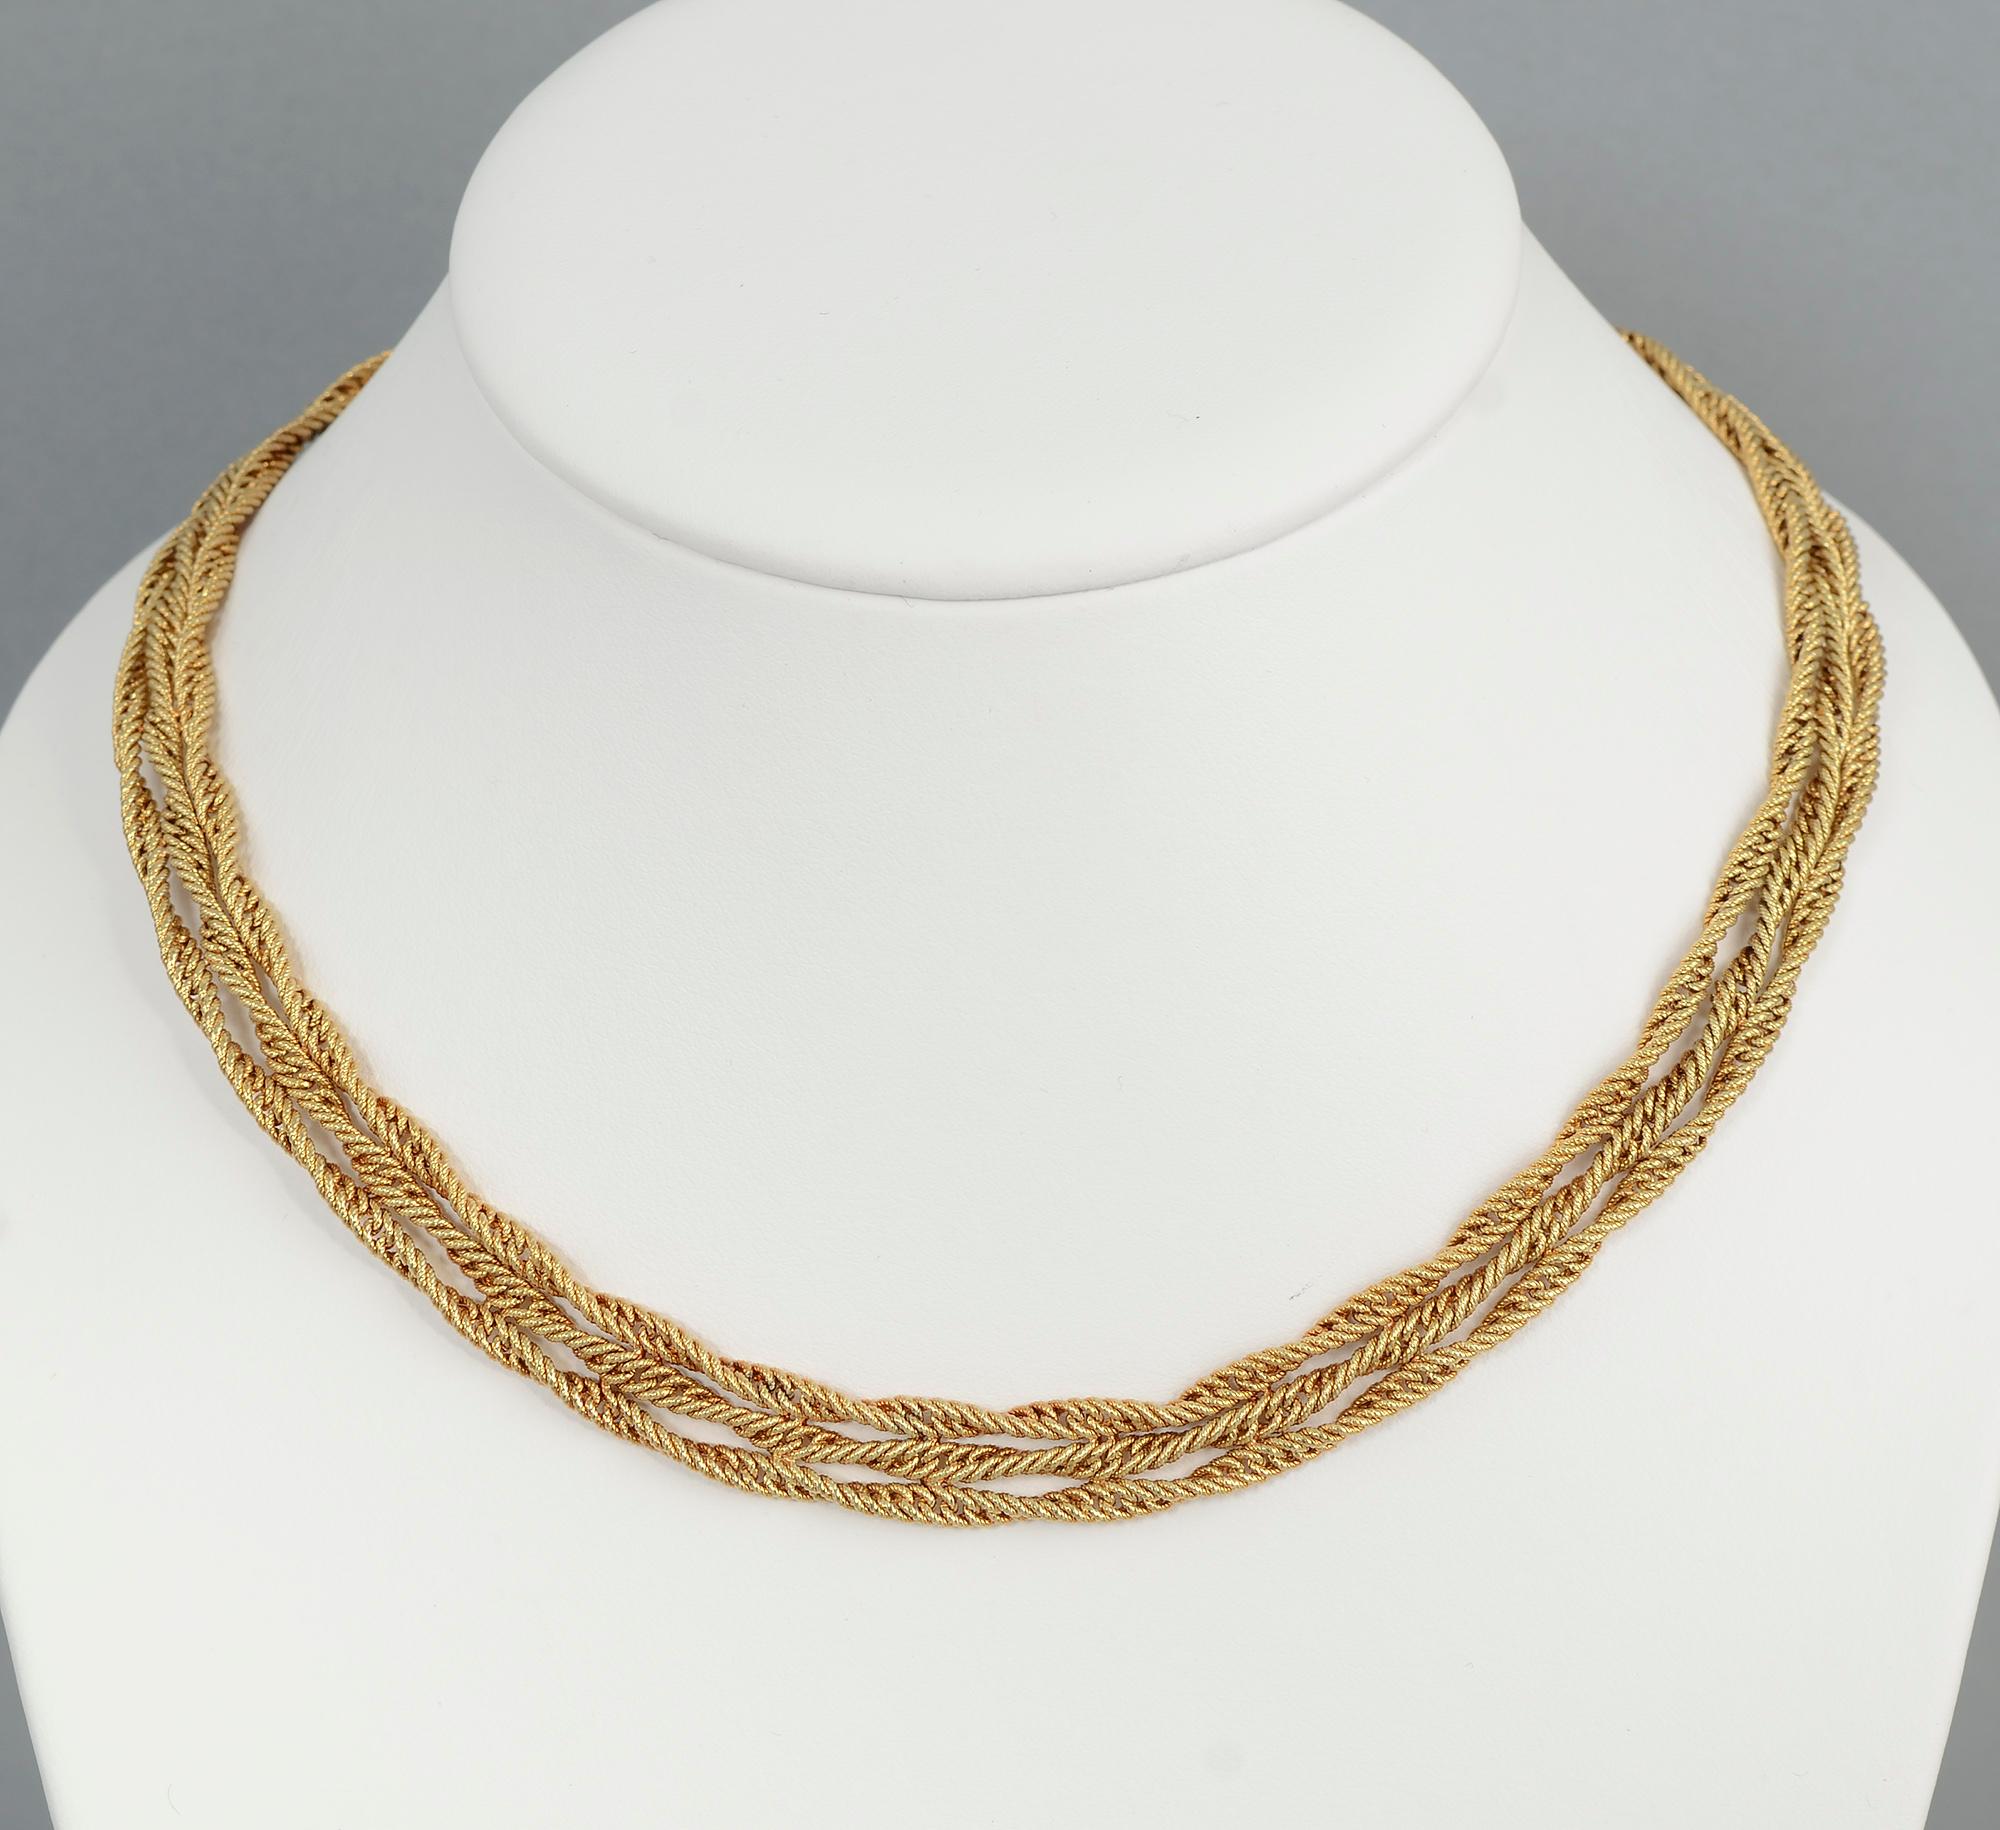 Unusual 14 karat gold choker necklace made of three double strands of  twisted gold in something of a foxtail pattern. The necklace is 17 1/2 inches long and 7/16